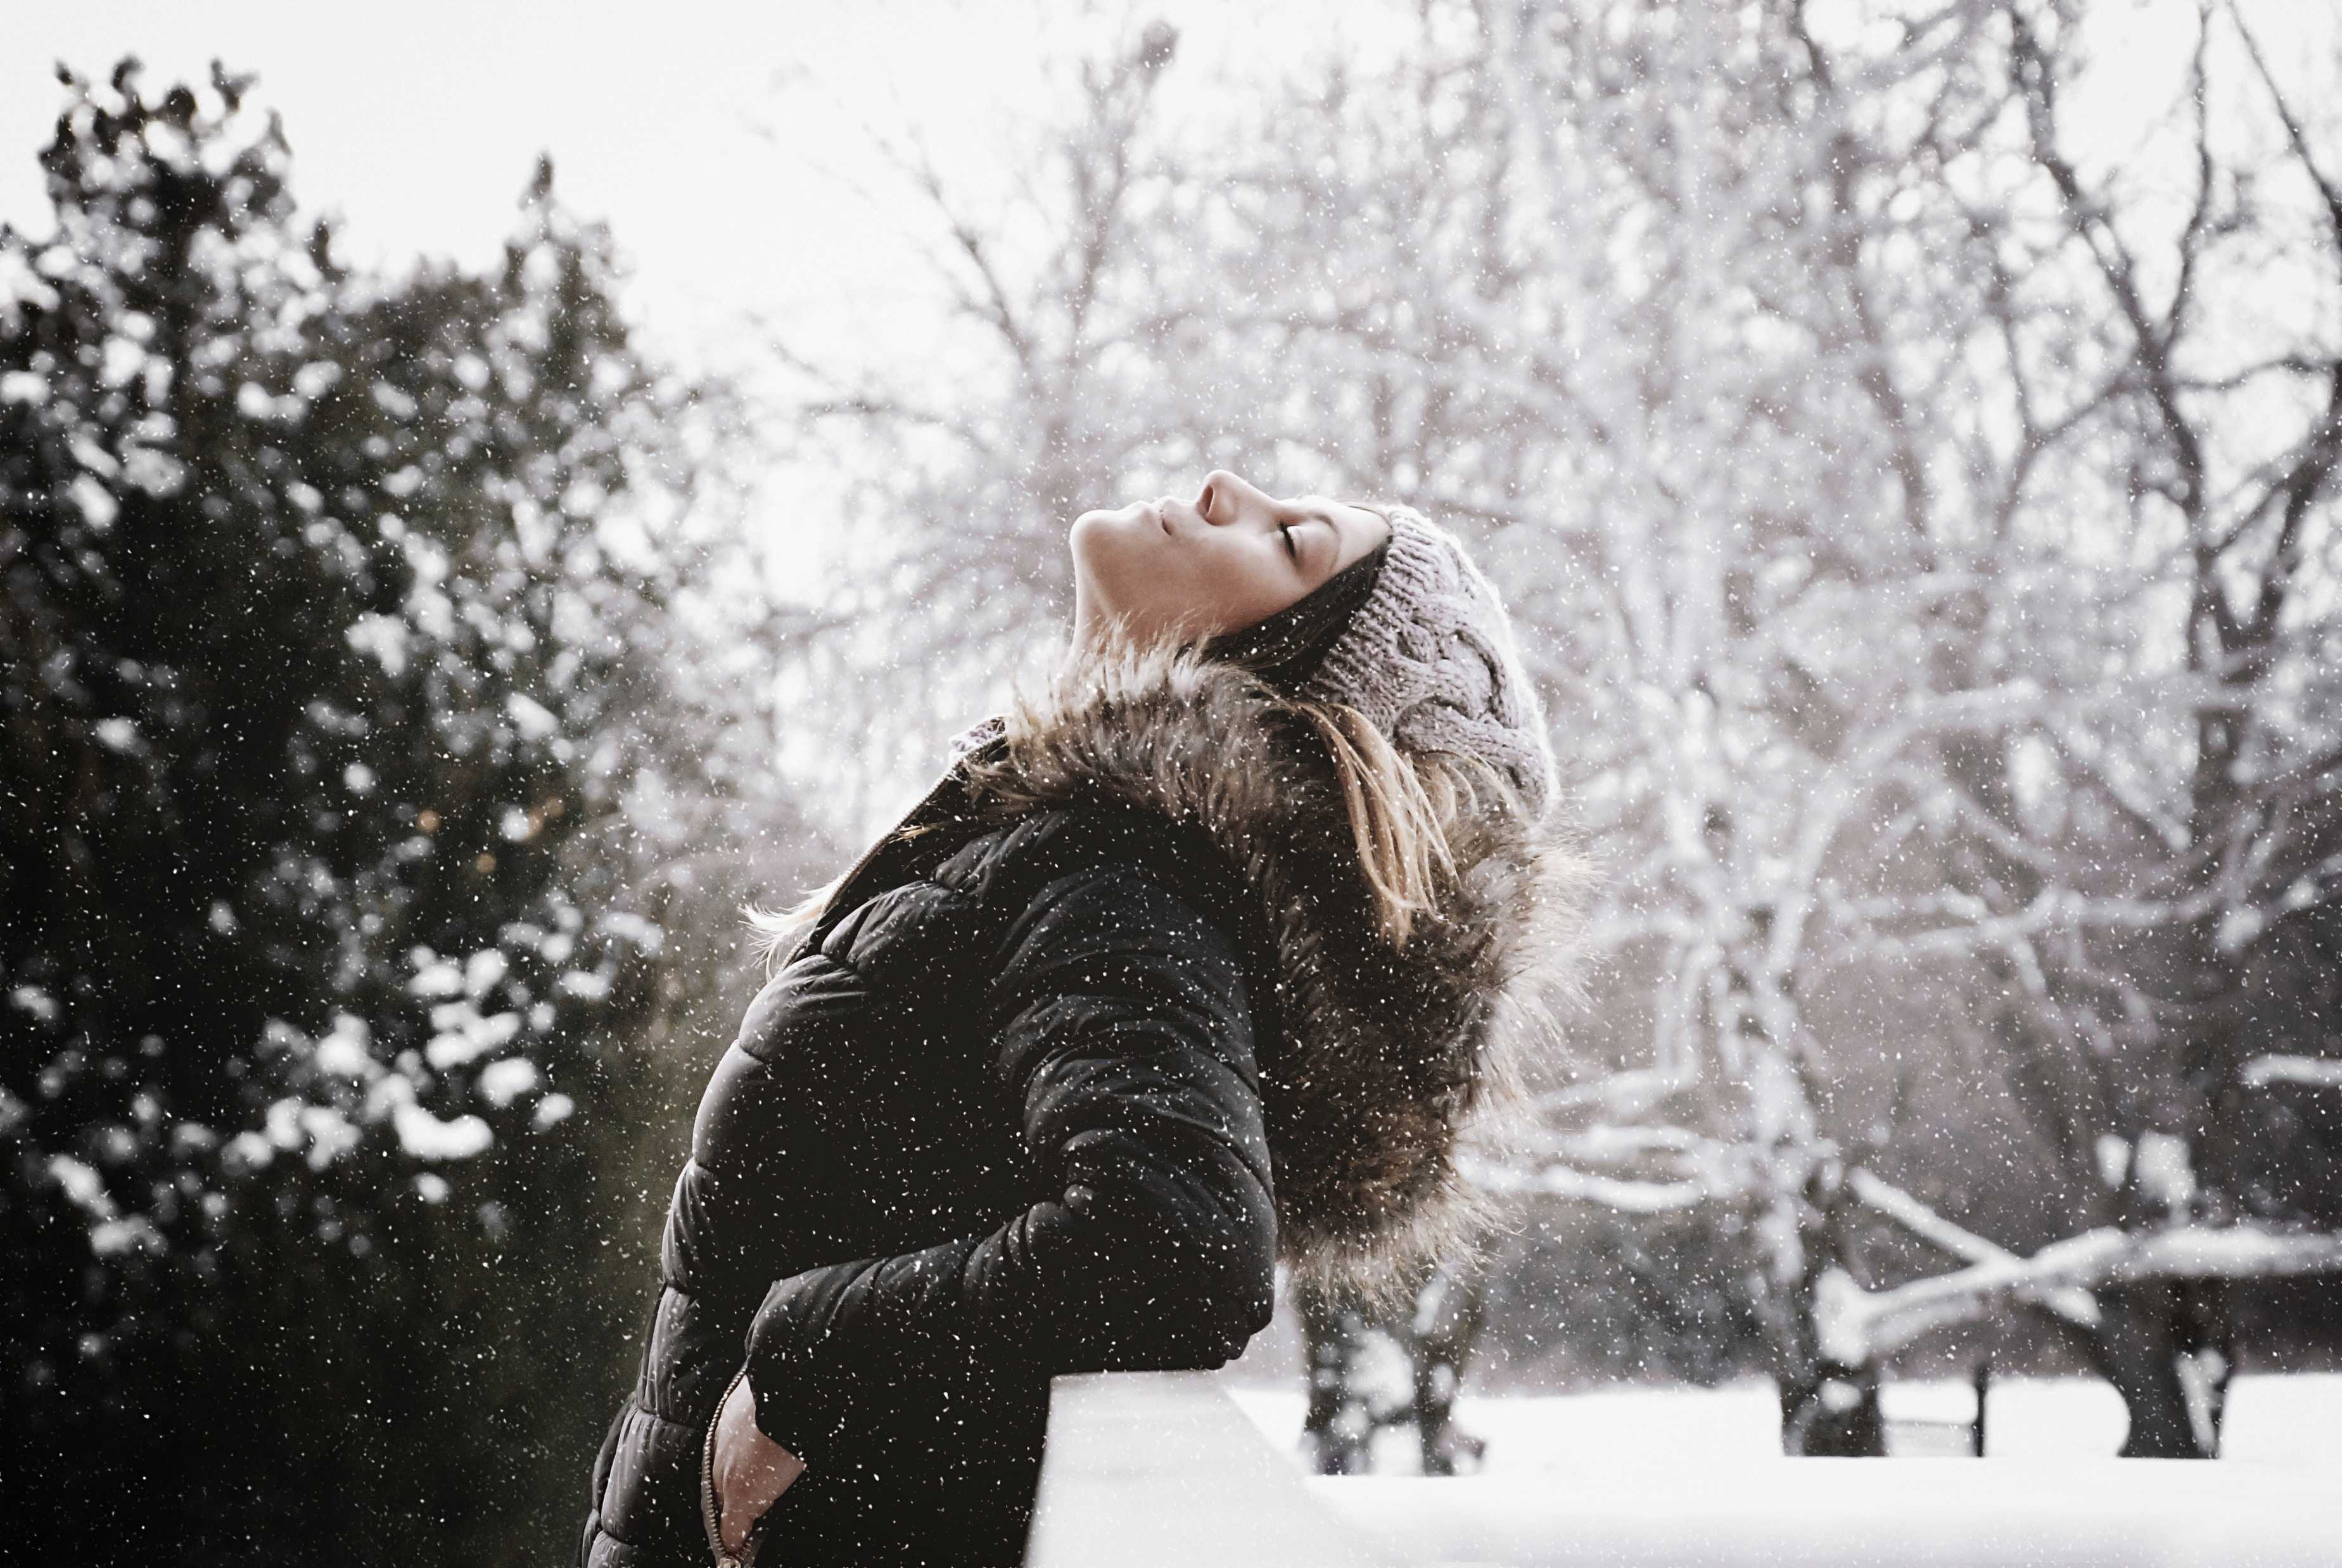 12 products to help your skin combat the winter weather